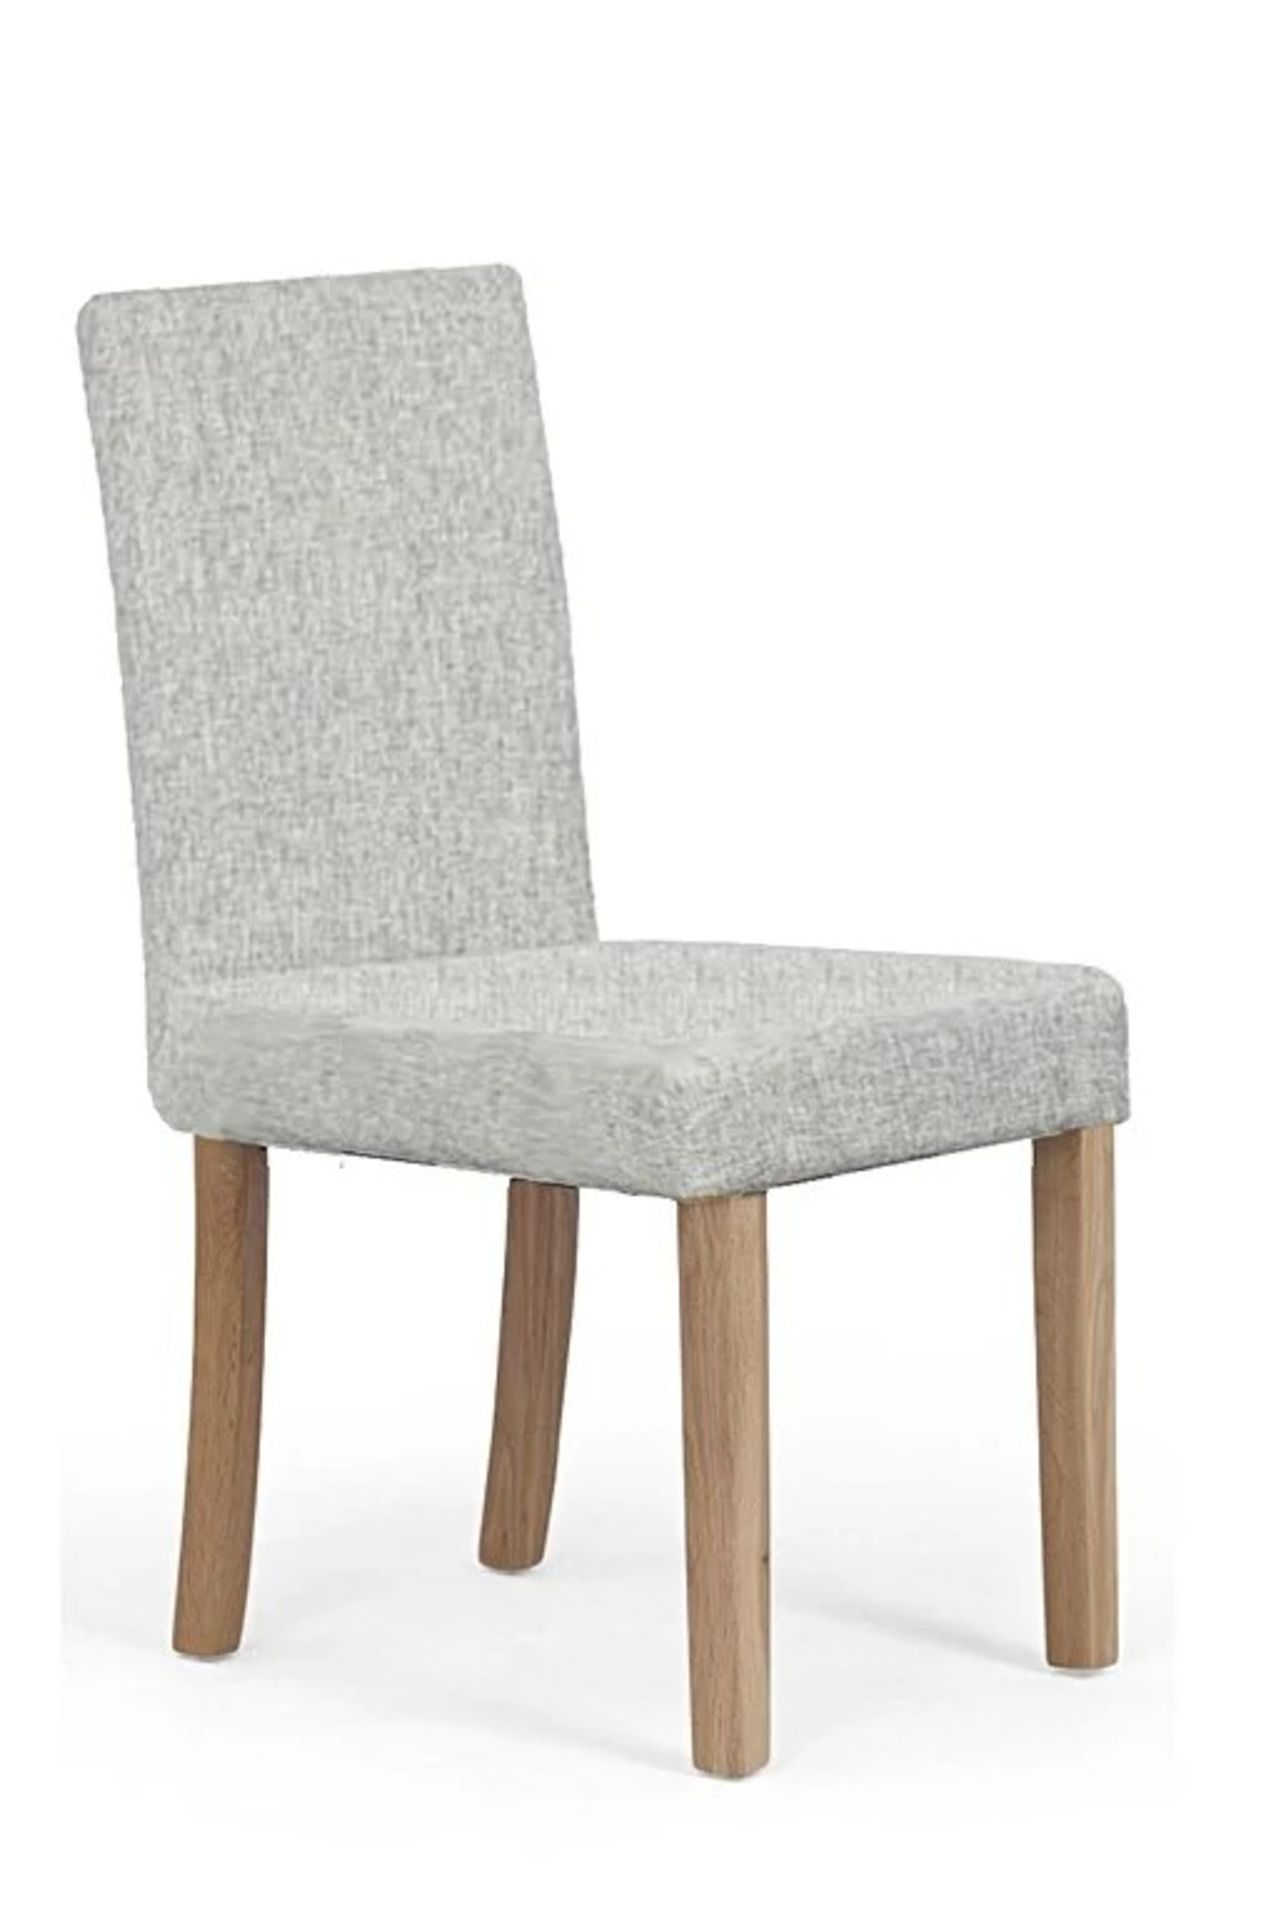 A set of 3 x Mia Fabric Dark Grey Linen Dining Chair Stylish and simple, the Mia offers a comfy